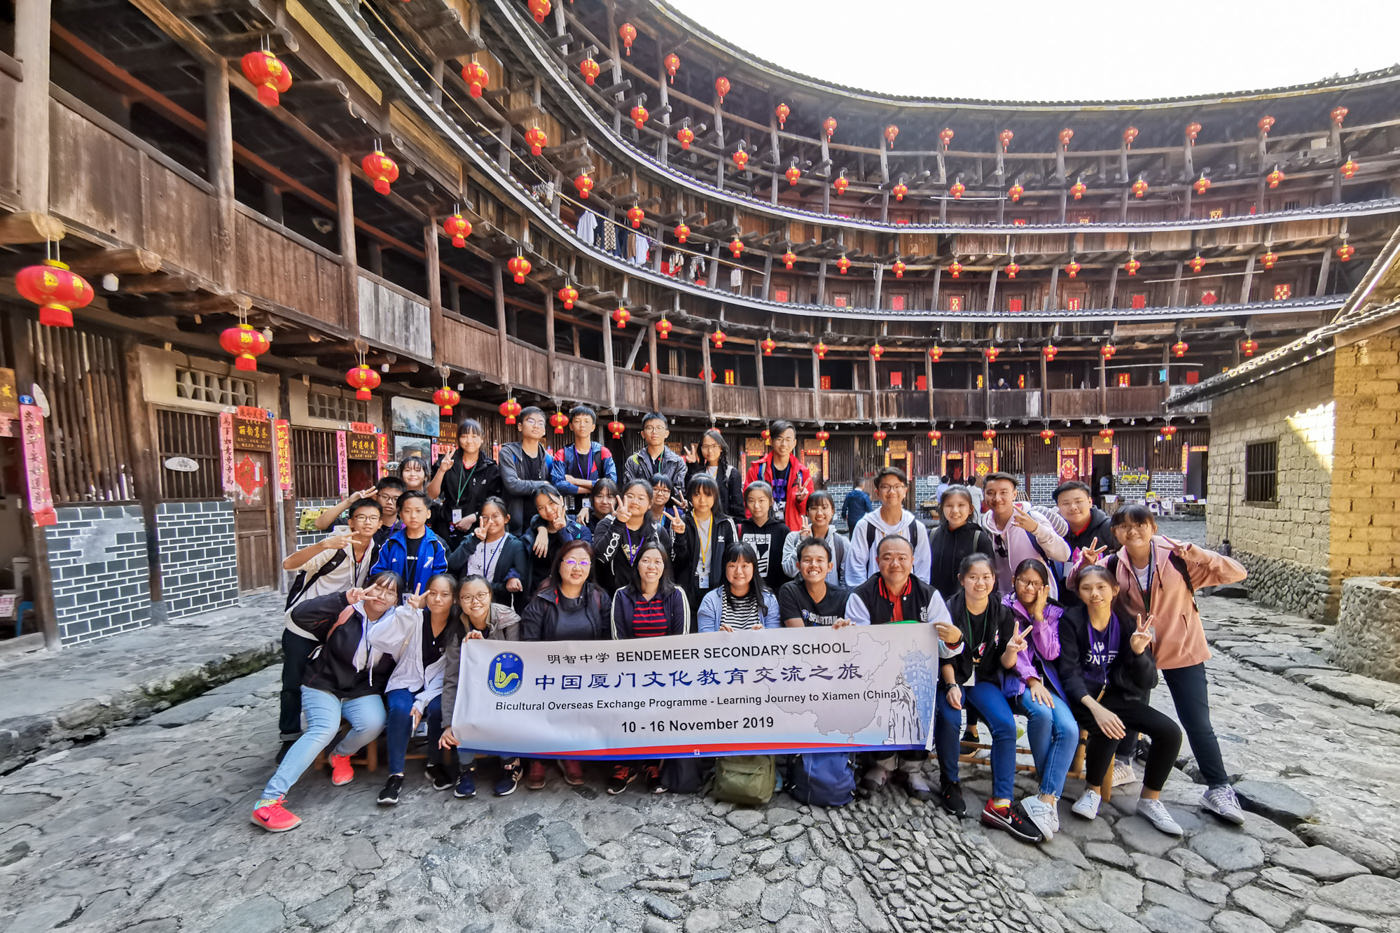 Learning Journey cum School Immersion Programme to Xiamen (China)